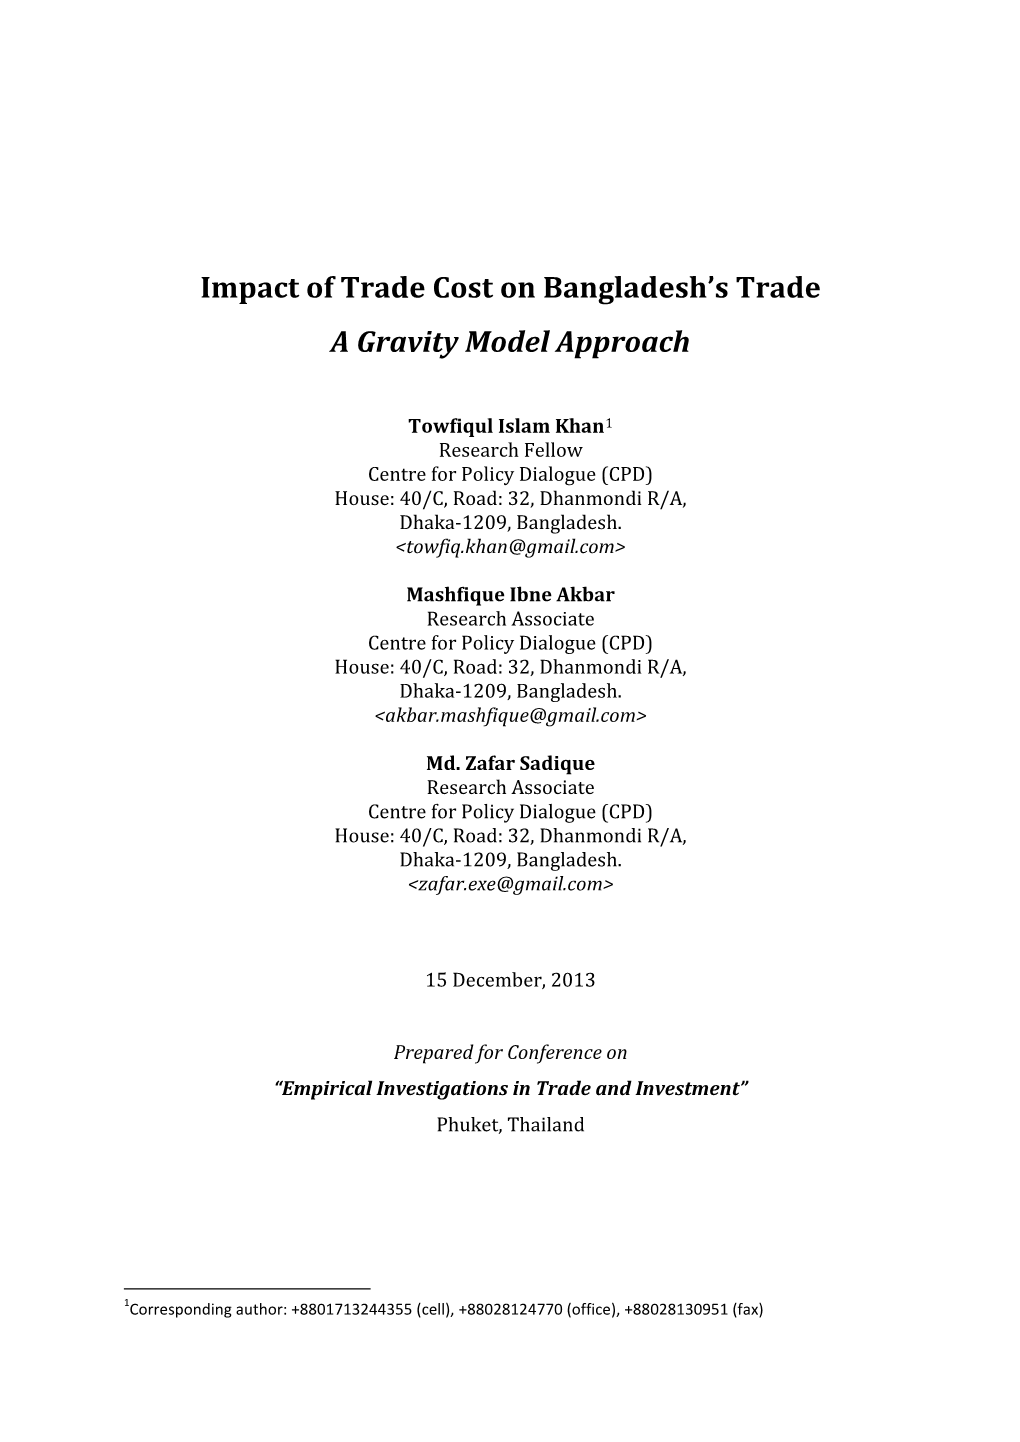 Impact of Trade Cost on Bangladesh's Trade a Gravity Model Approach